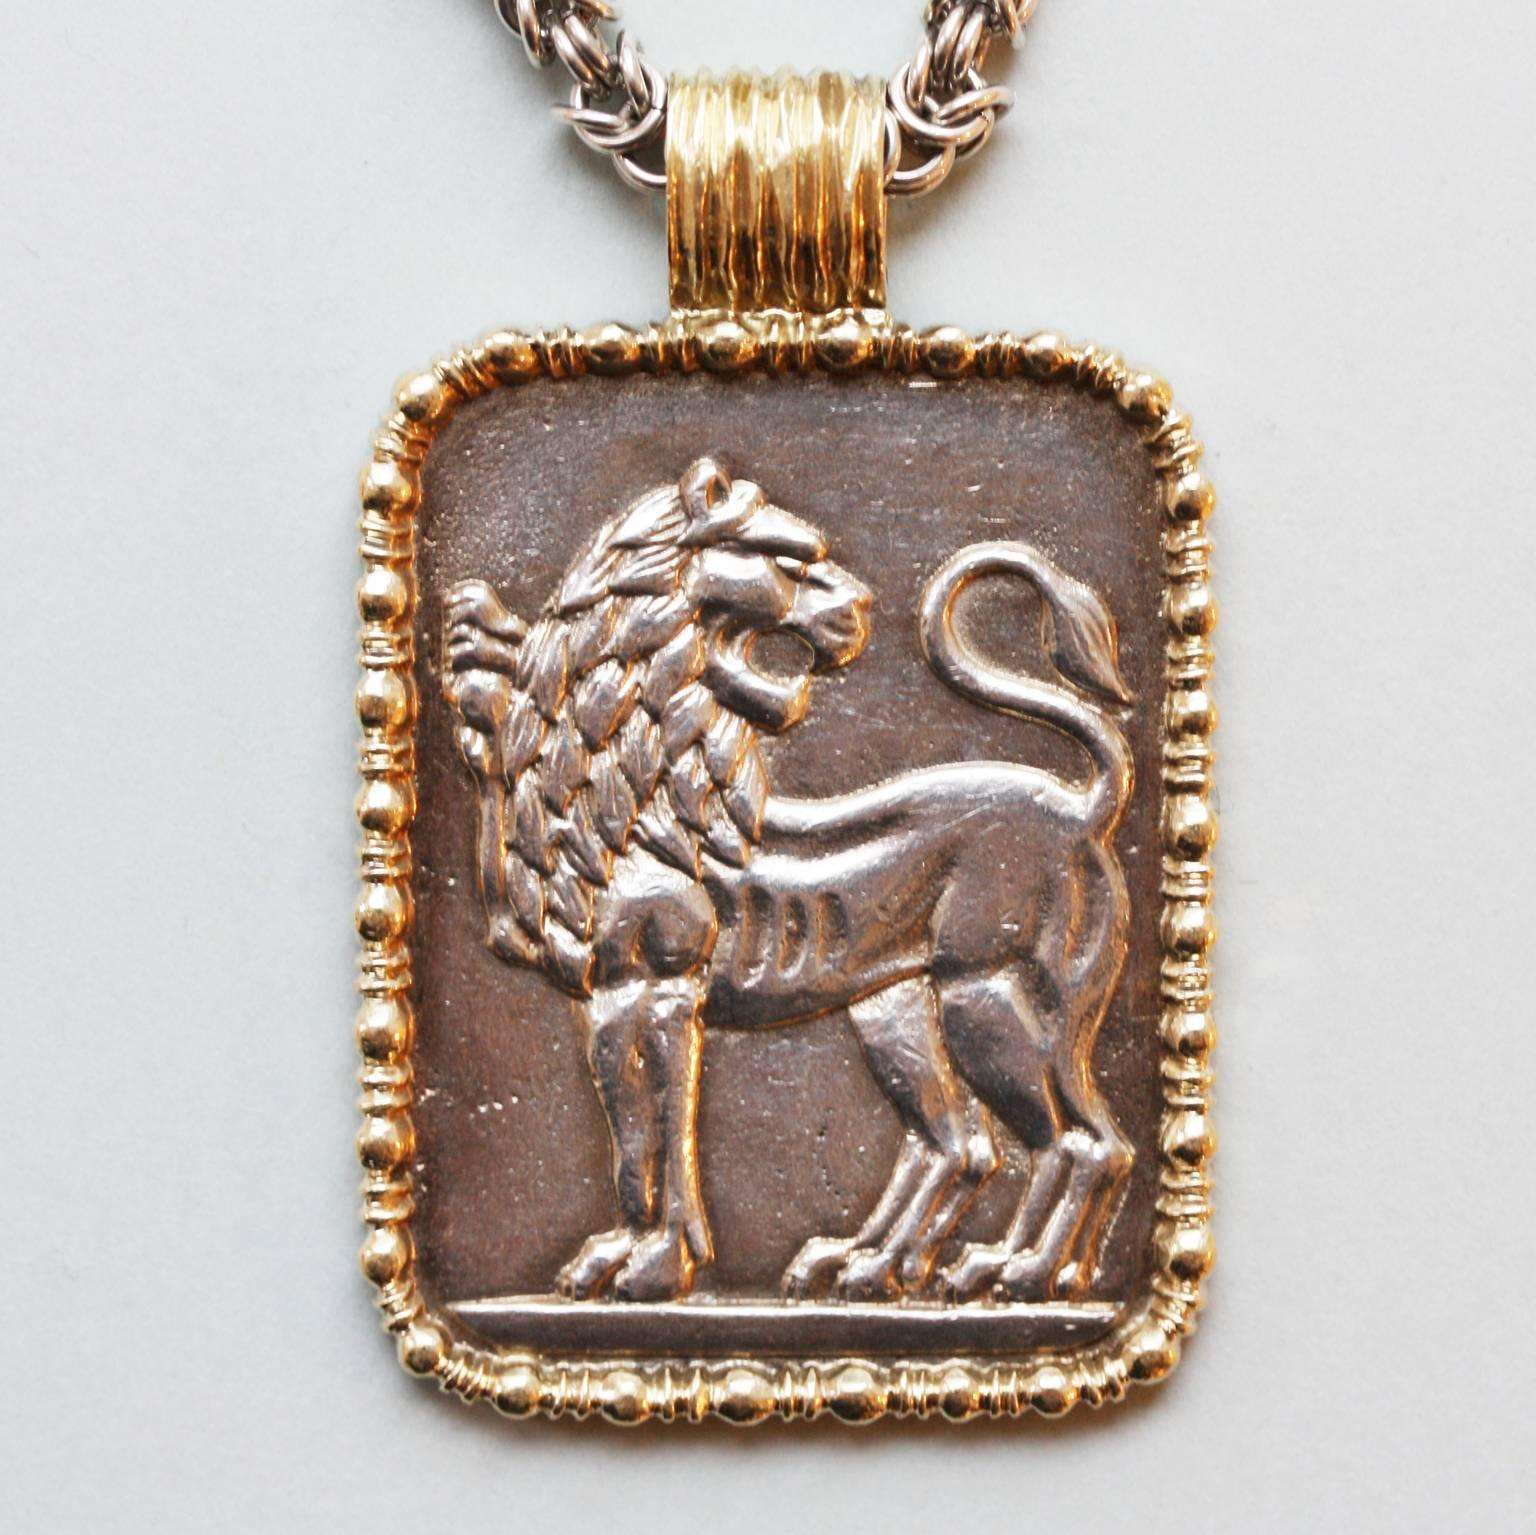 A silver and silver gilt chain (Byzantine and cable link) with a silver gilt Leo zodiac, signed: Fred, Paris, circa 1970/80.

total weight: 108 grams
length chain 95 cm.
dimensions zodiac: 5.2 x 3.3. cm.